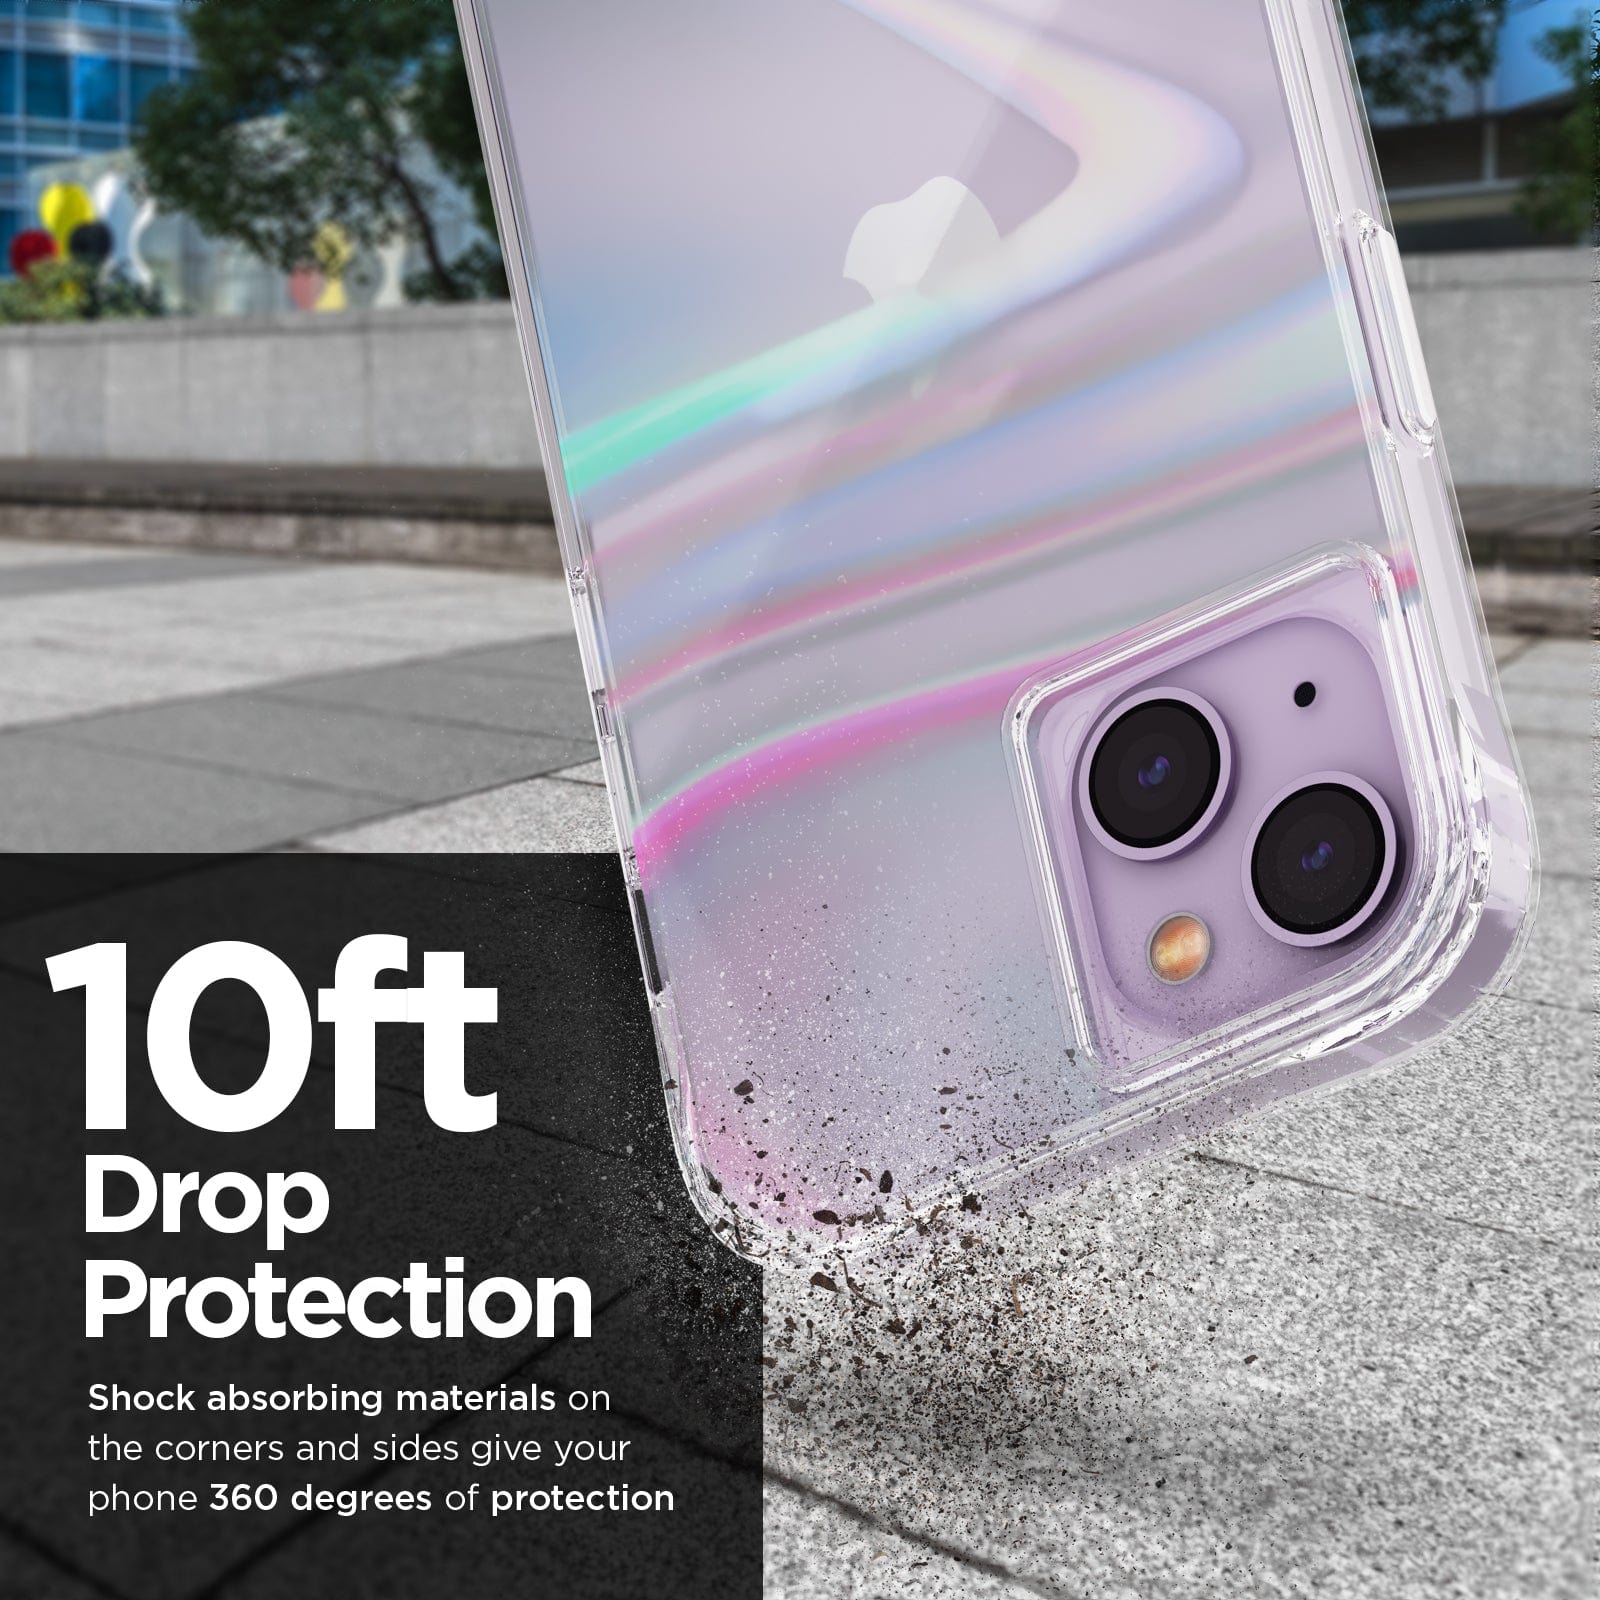 10FT DROP PROTECTION. SHOCK ABSORBING MATERIALS ON THE CORNERS AND SIDES GIVE YOUR PHONE 360 DEGREES OF PROTECTION